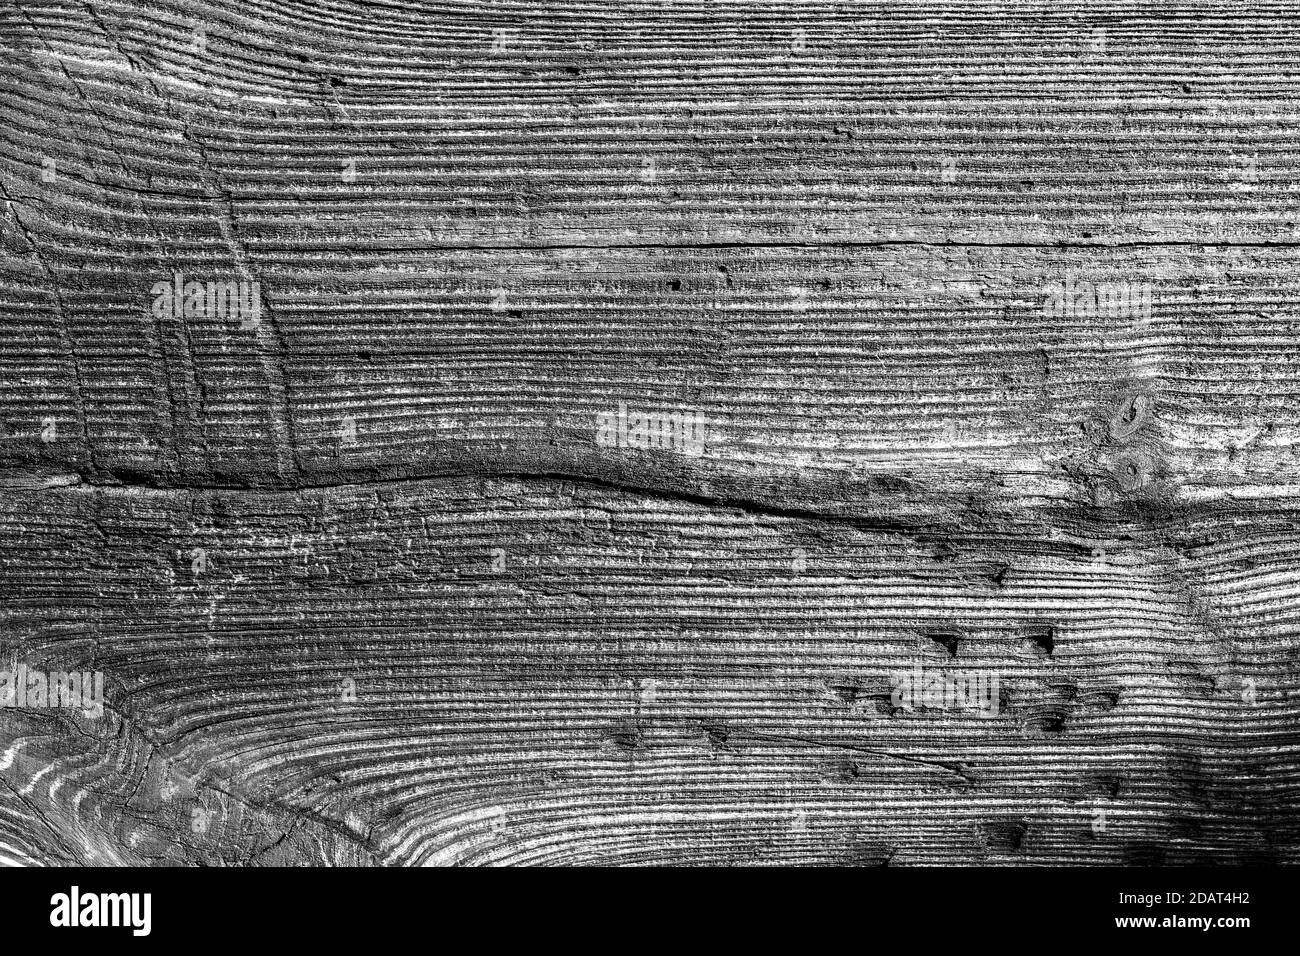 Old wood structure, wood pattern, plank, board. 200 years old wooden wall. Sharp, good visible growth rings, parallel lines and curves. Stock Photo